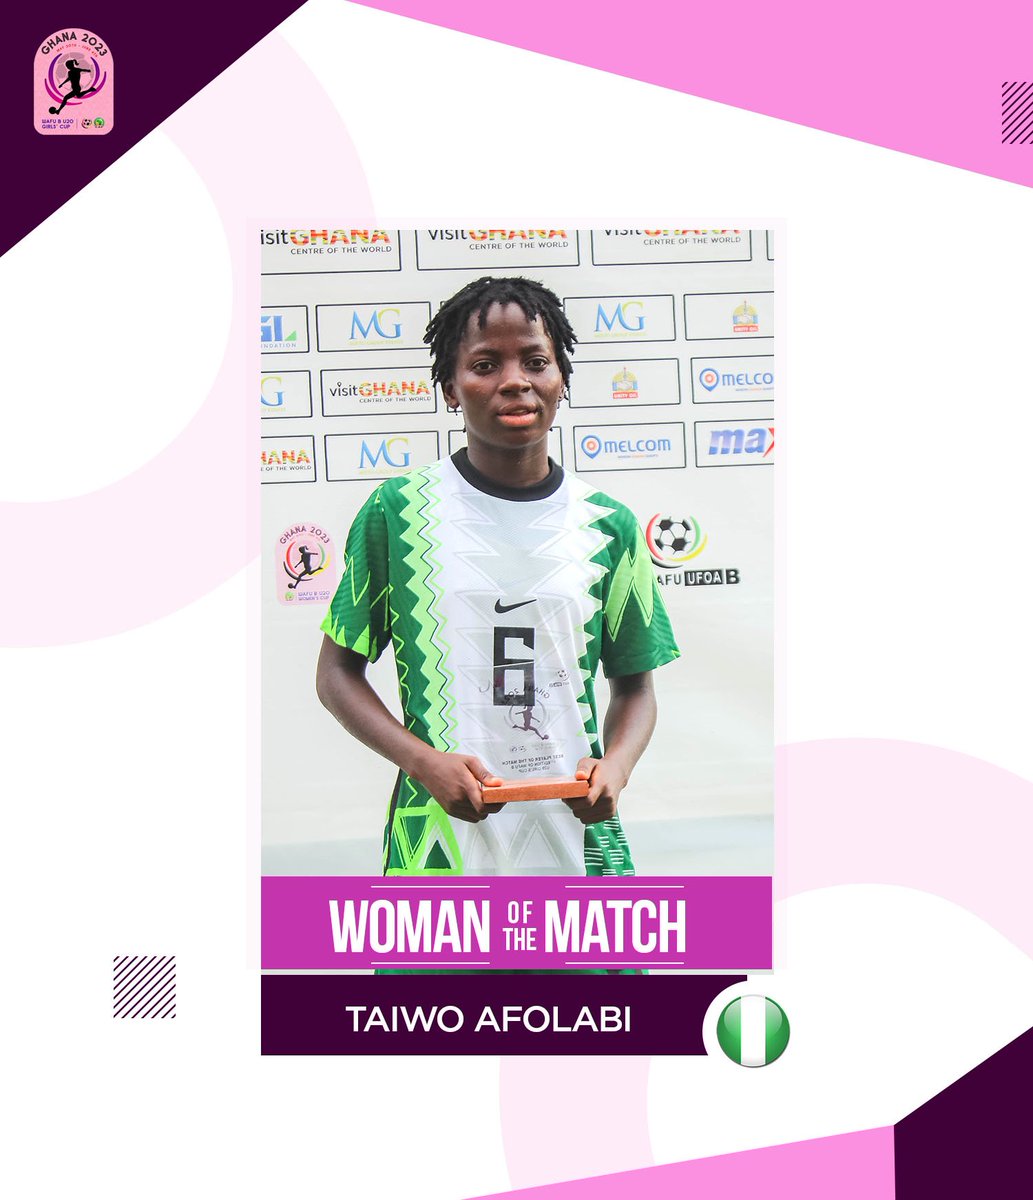 I'm happy to be win the Woman Of The Match Award in the encounter against Burkina Faso, this is a huge step in my career and a notable award I will cherish. Alhamdullilah 🙏🏼 Thank you God❤️🙏🏼🇳🇬 #KumasiU20WafuBGirls #Tewogbola #T10 #PocketPass #NaijaMade #Team9jaStrong